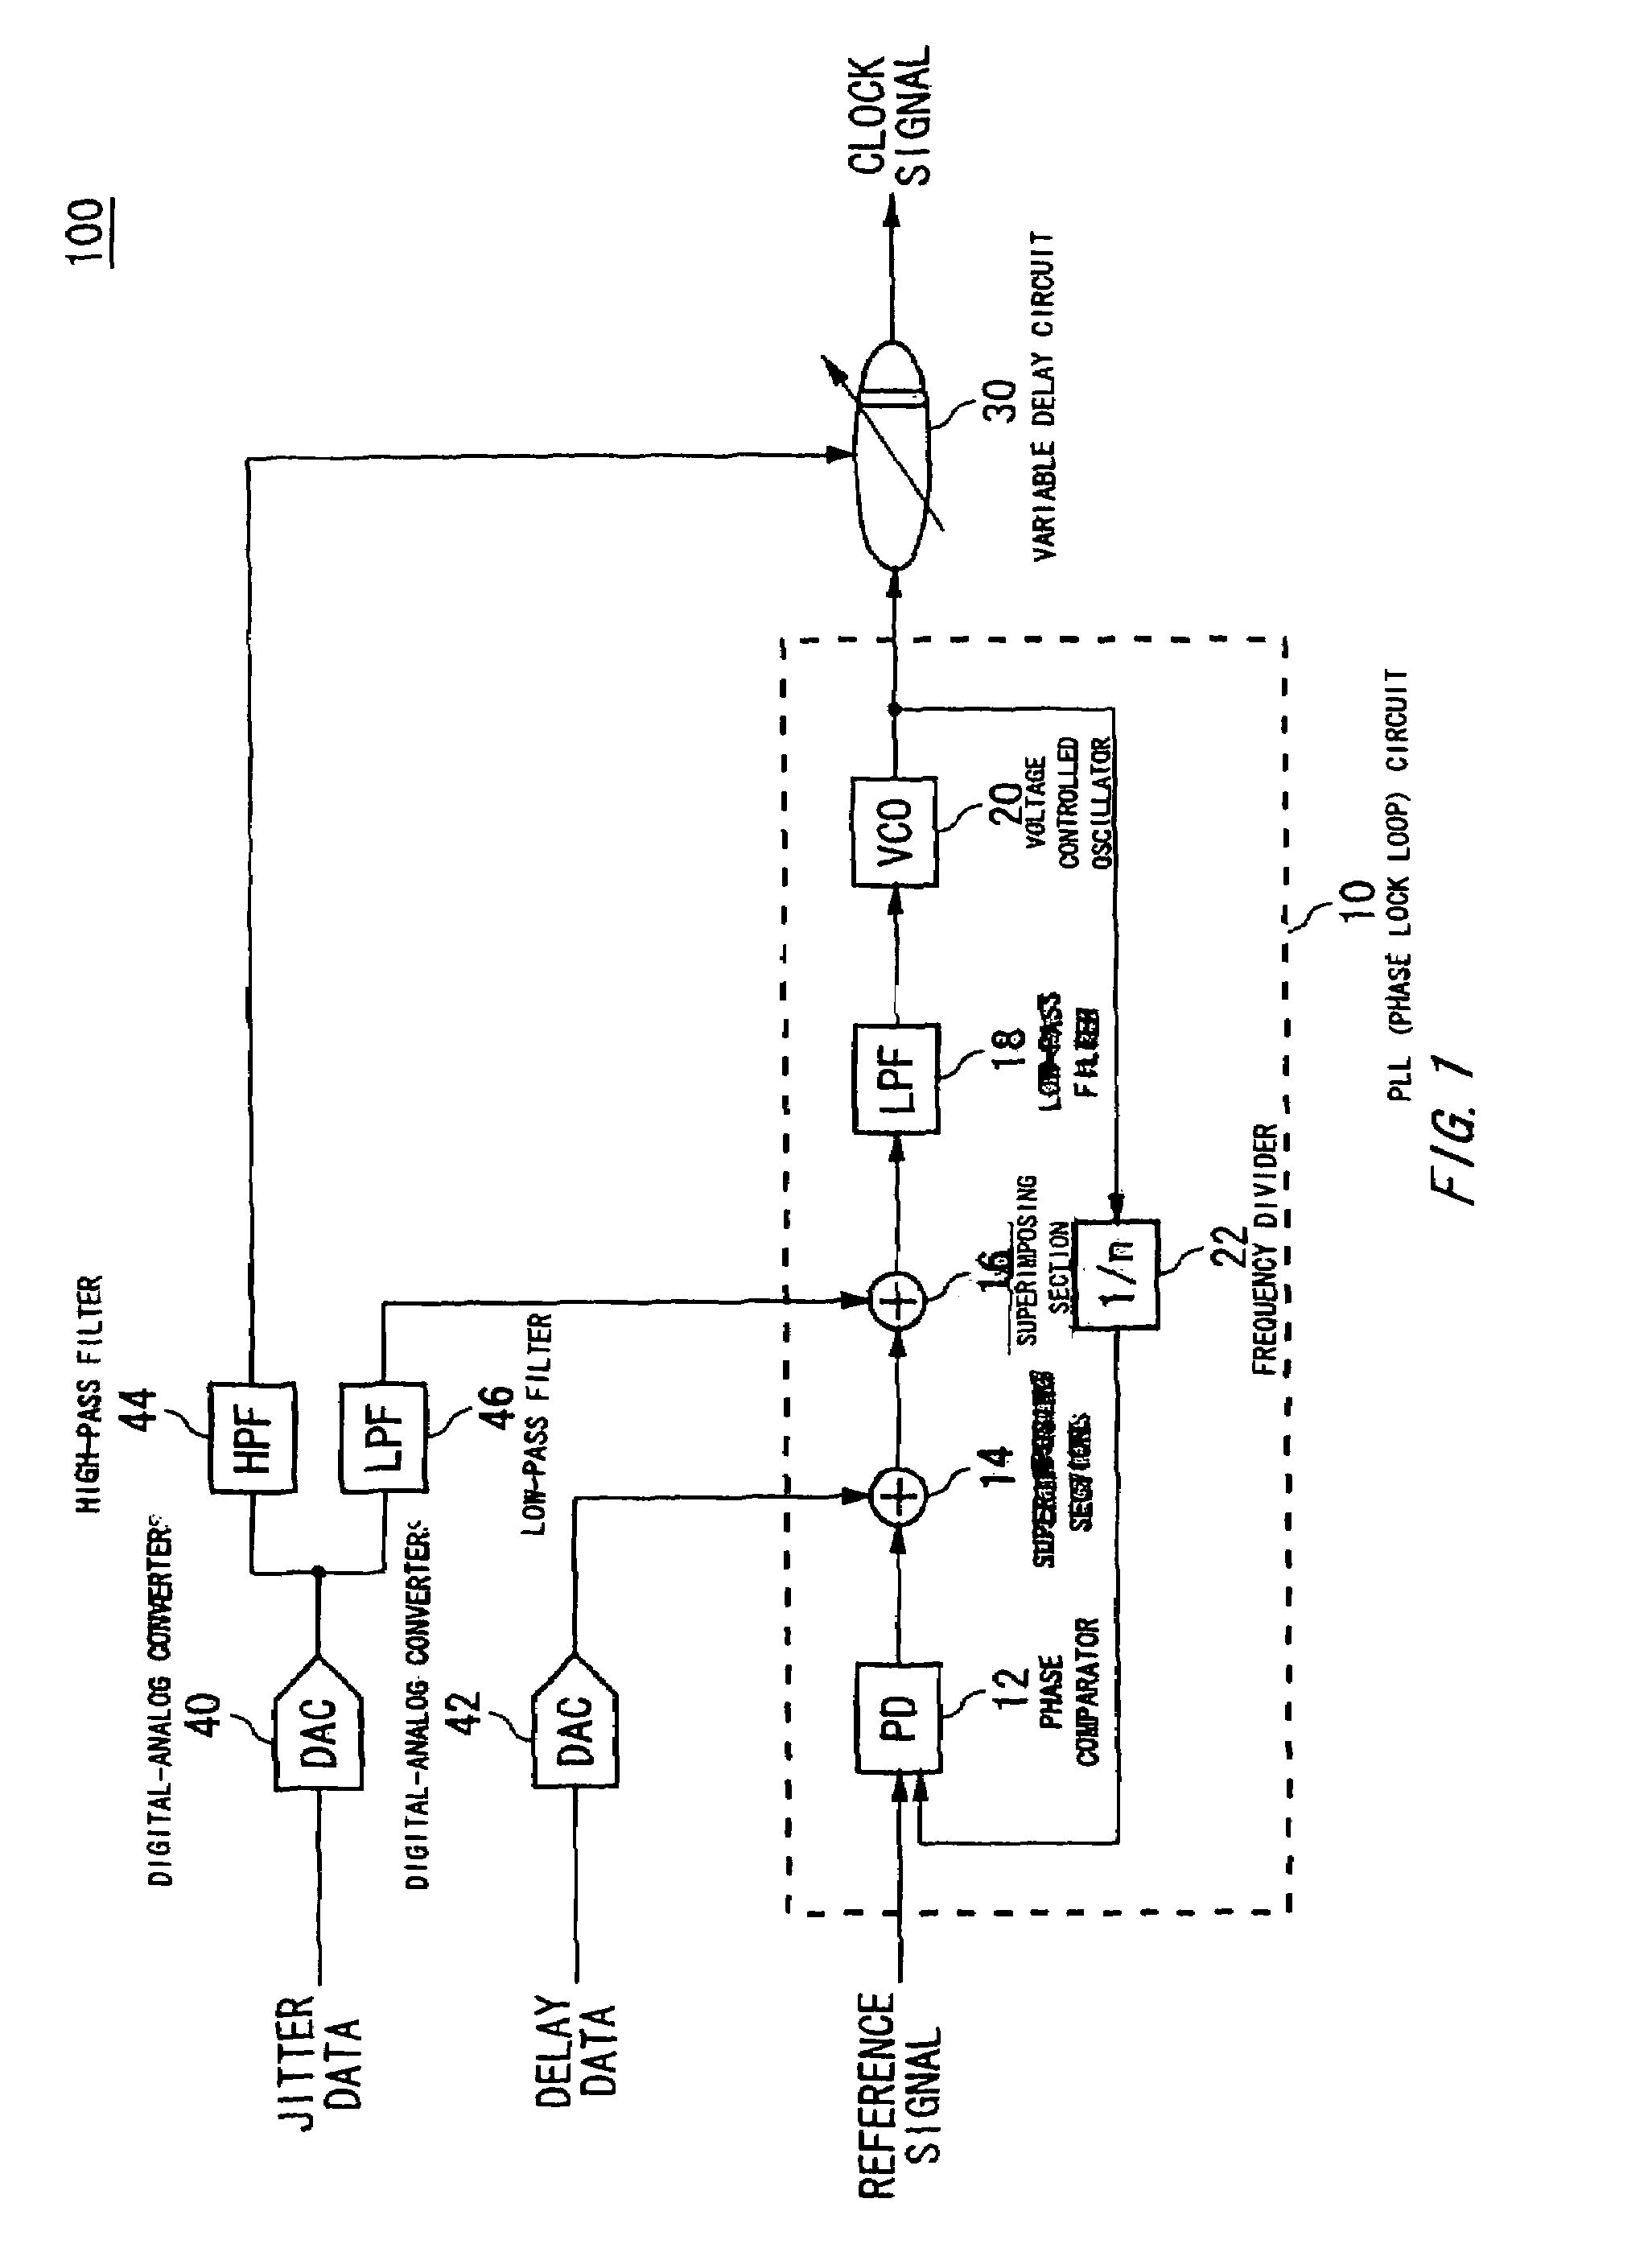 Jitter applying circuit and test apparatus